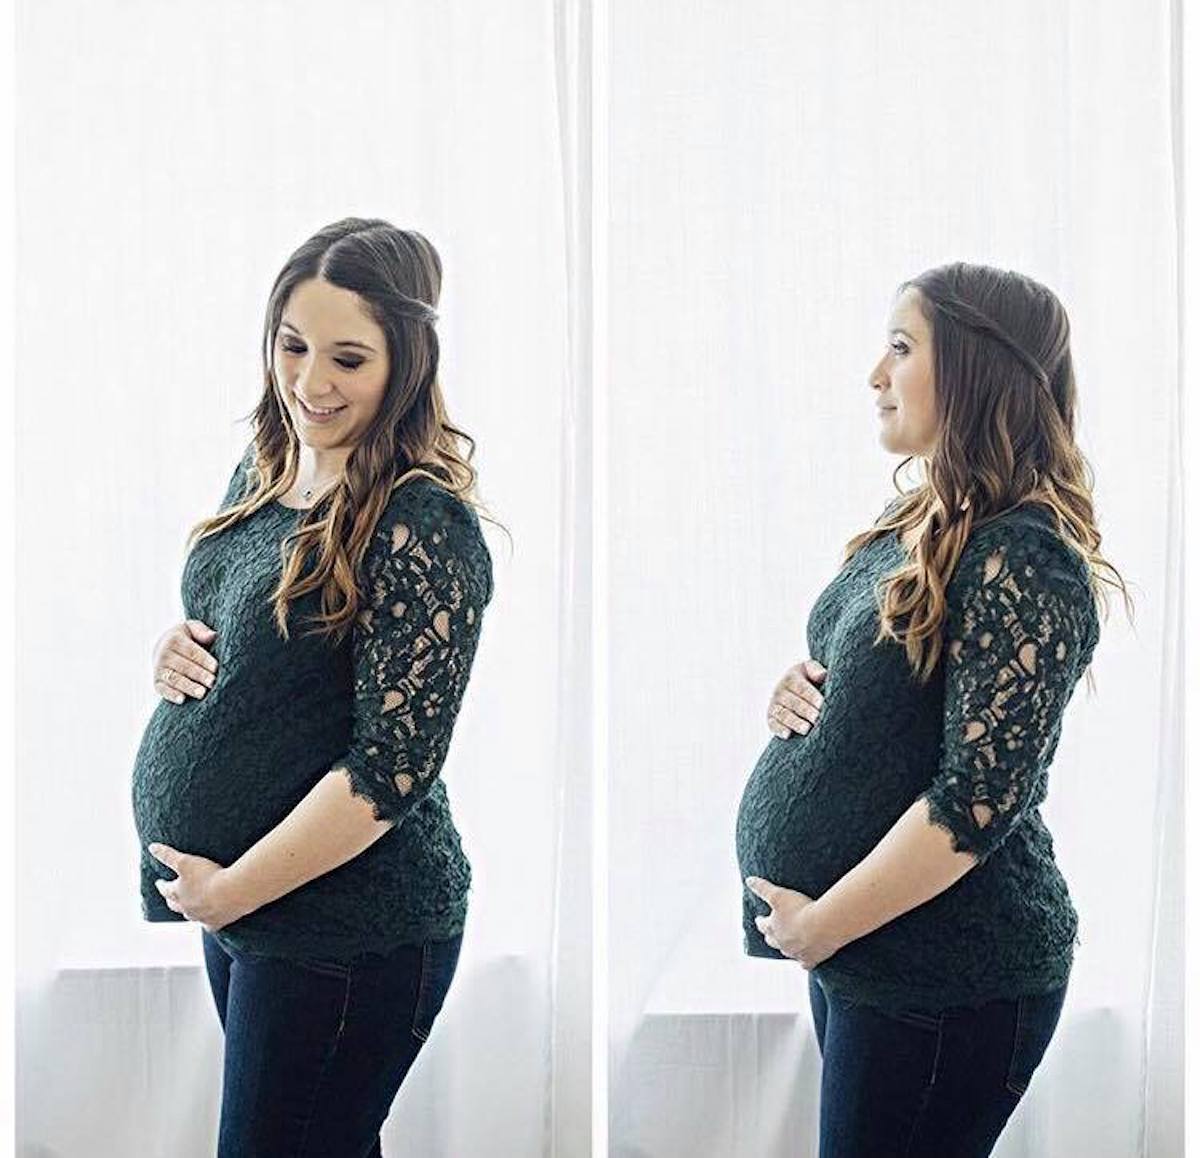 Woman wearing green lace top holds bump during studio maternity pictures.